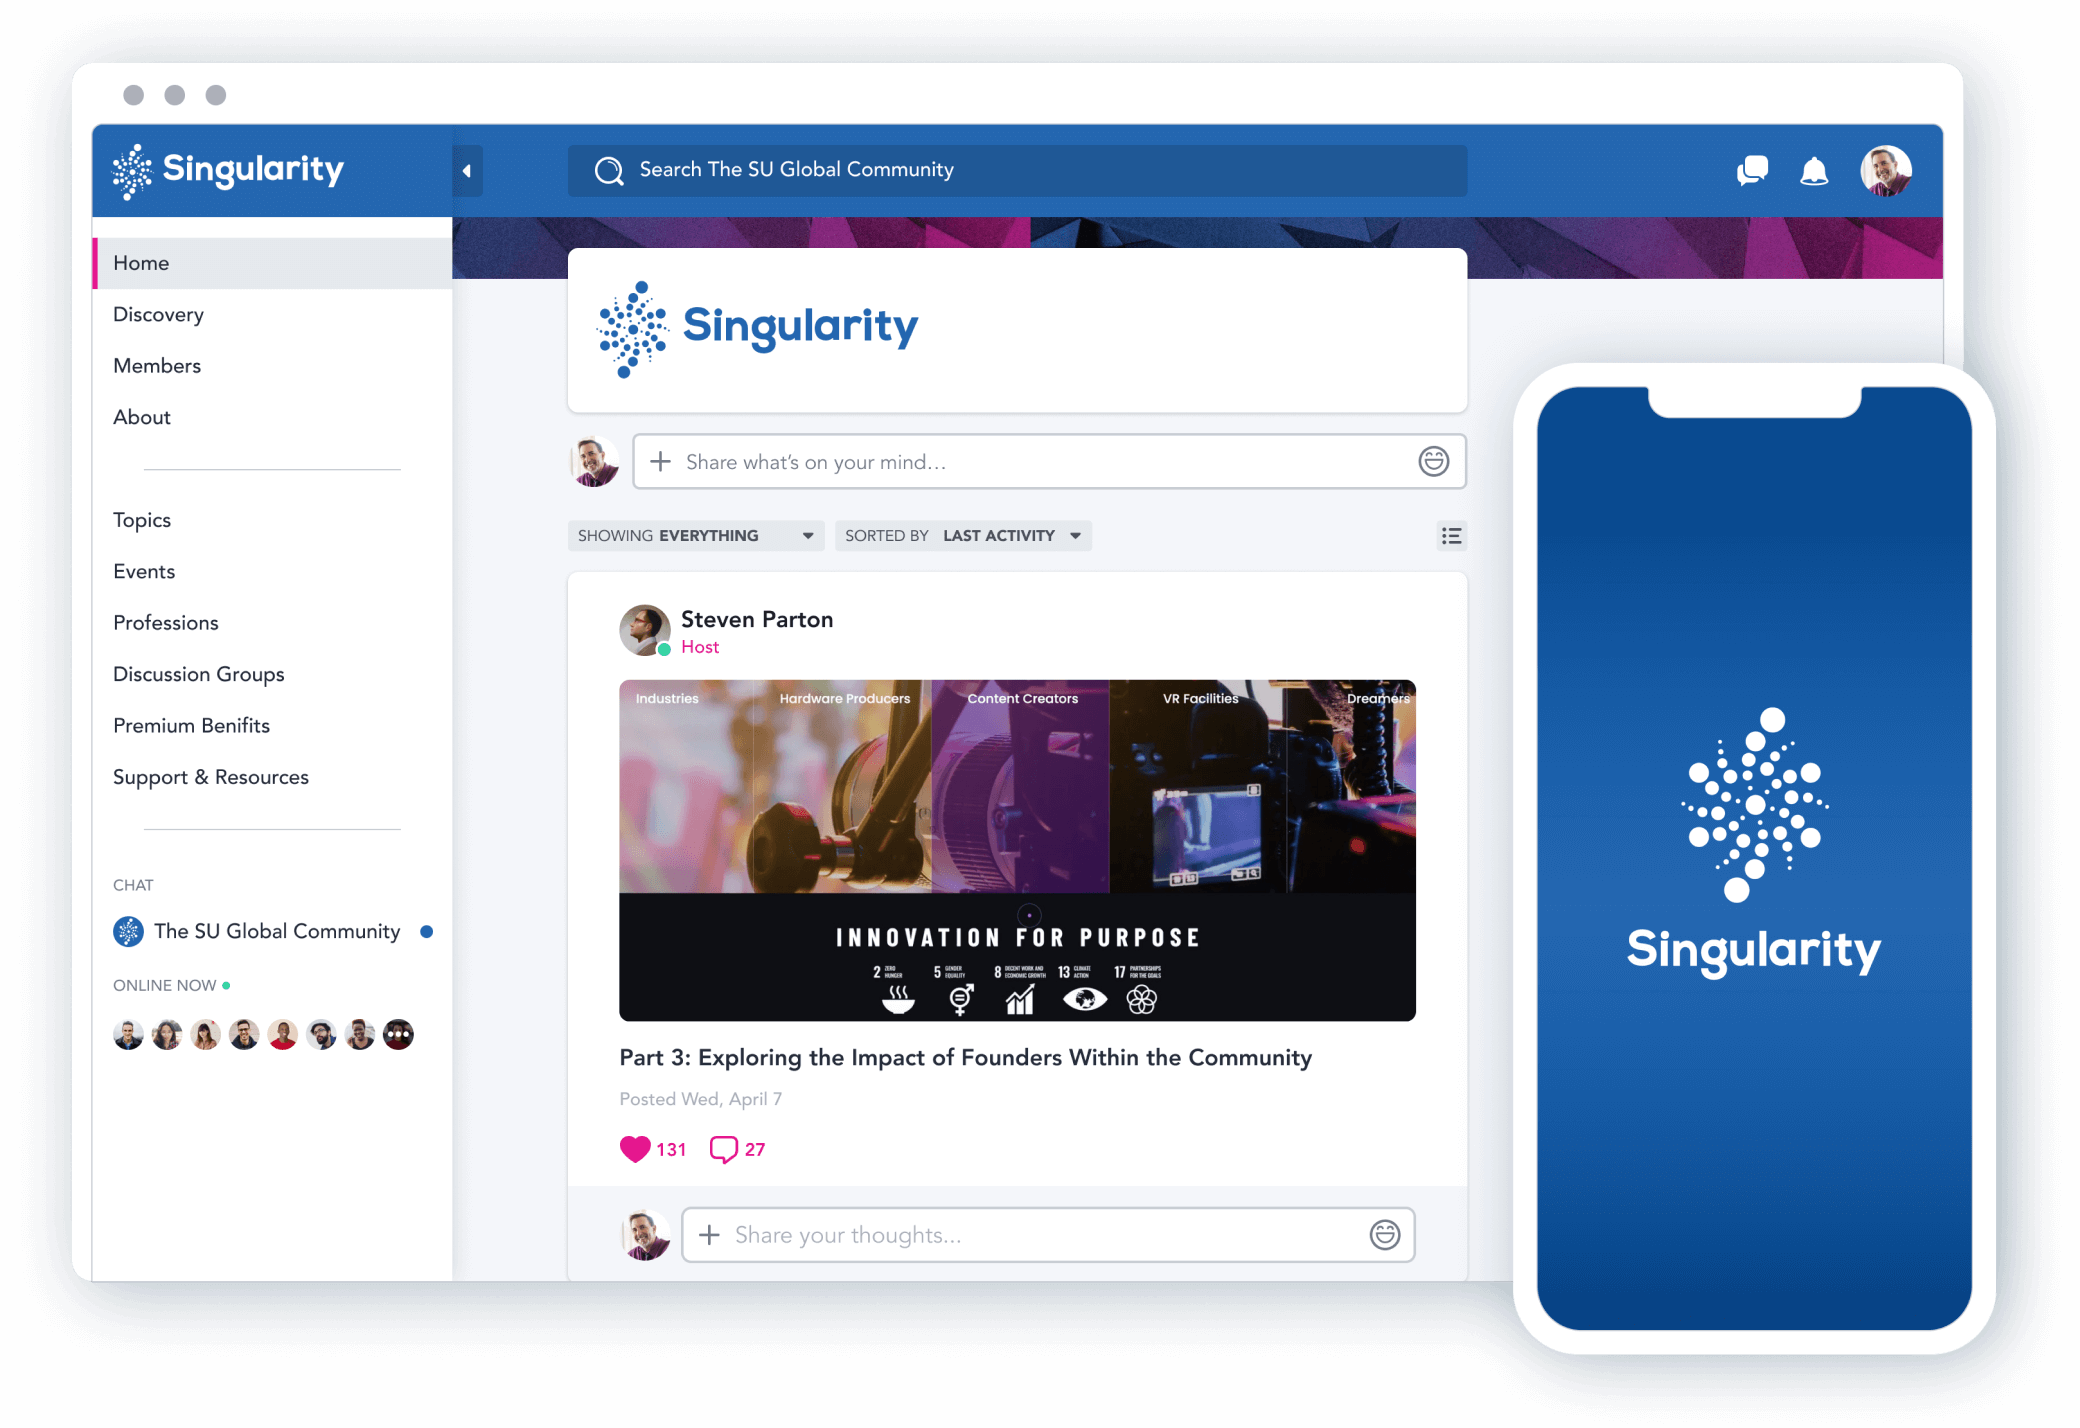 Mighty Pro Software - Singularity University - Mighty Pro branded app examples